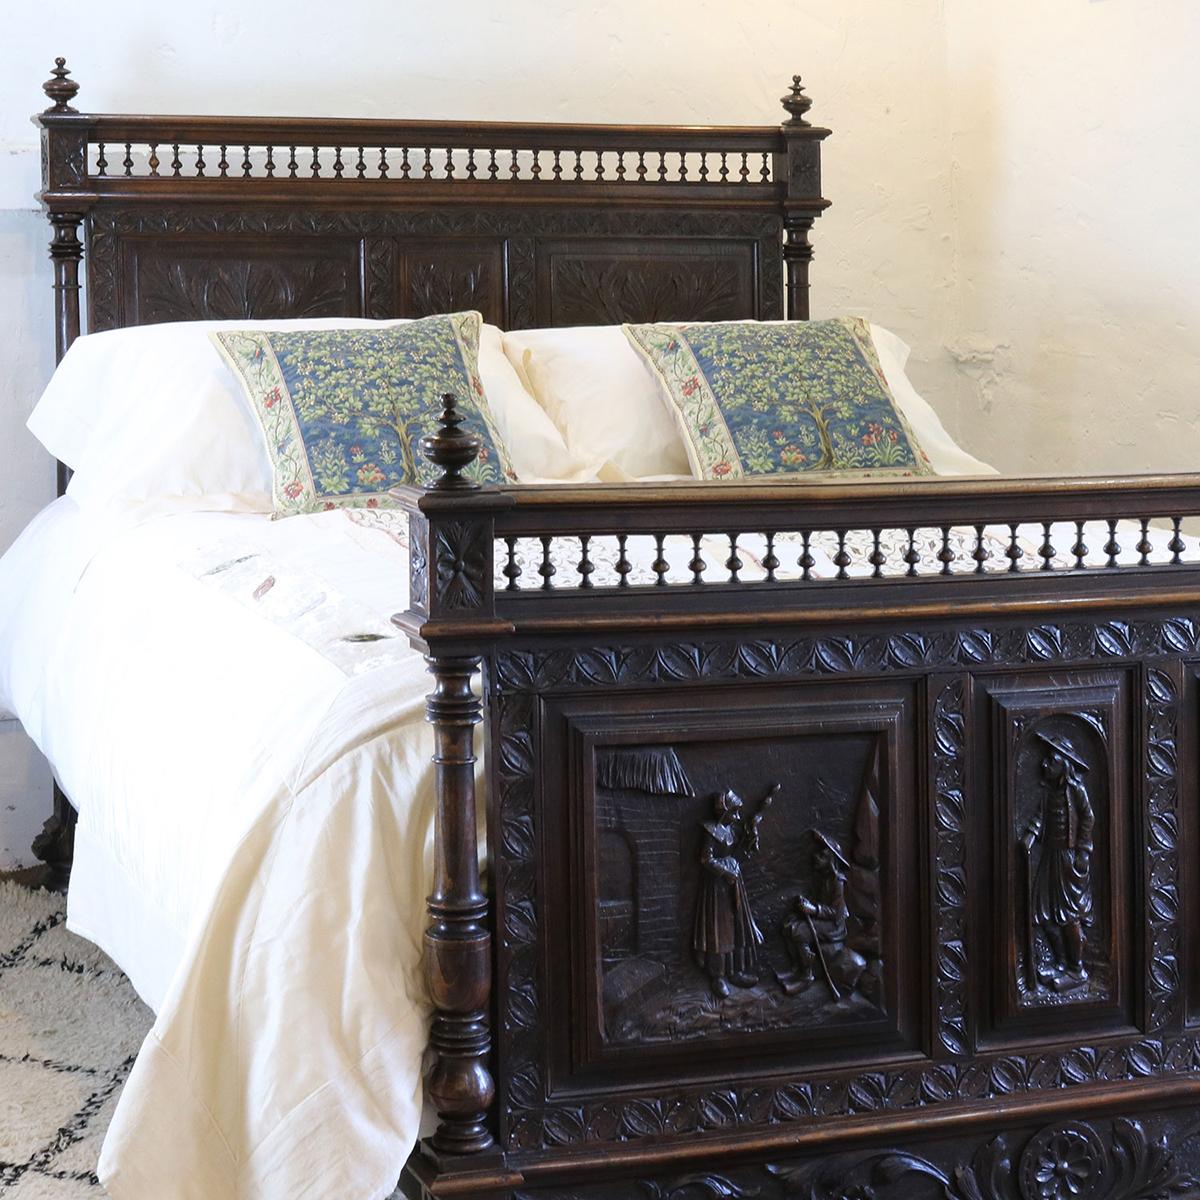 Oak Flemish bed with richly carved panels and scenes depicting rural life.

The bed accepts a British king-size or American queen-size (60 inches, 5ft or 150cm wide) base and mattress.

The price is for the bed frame alone. The base, mattress,